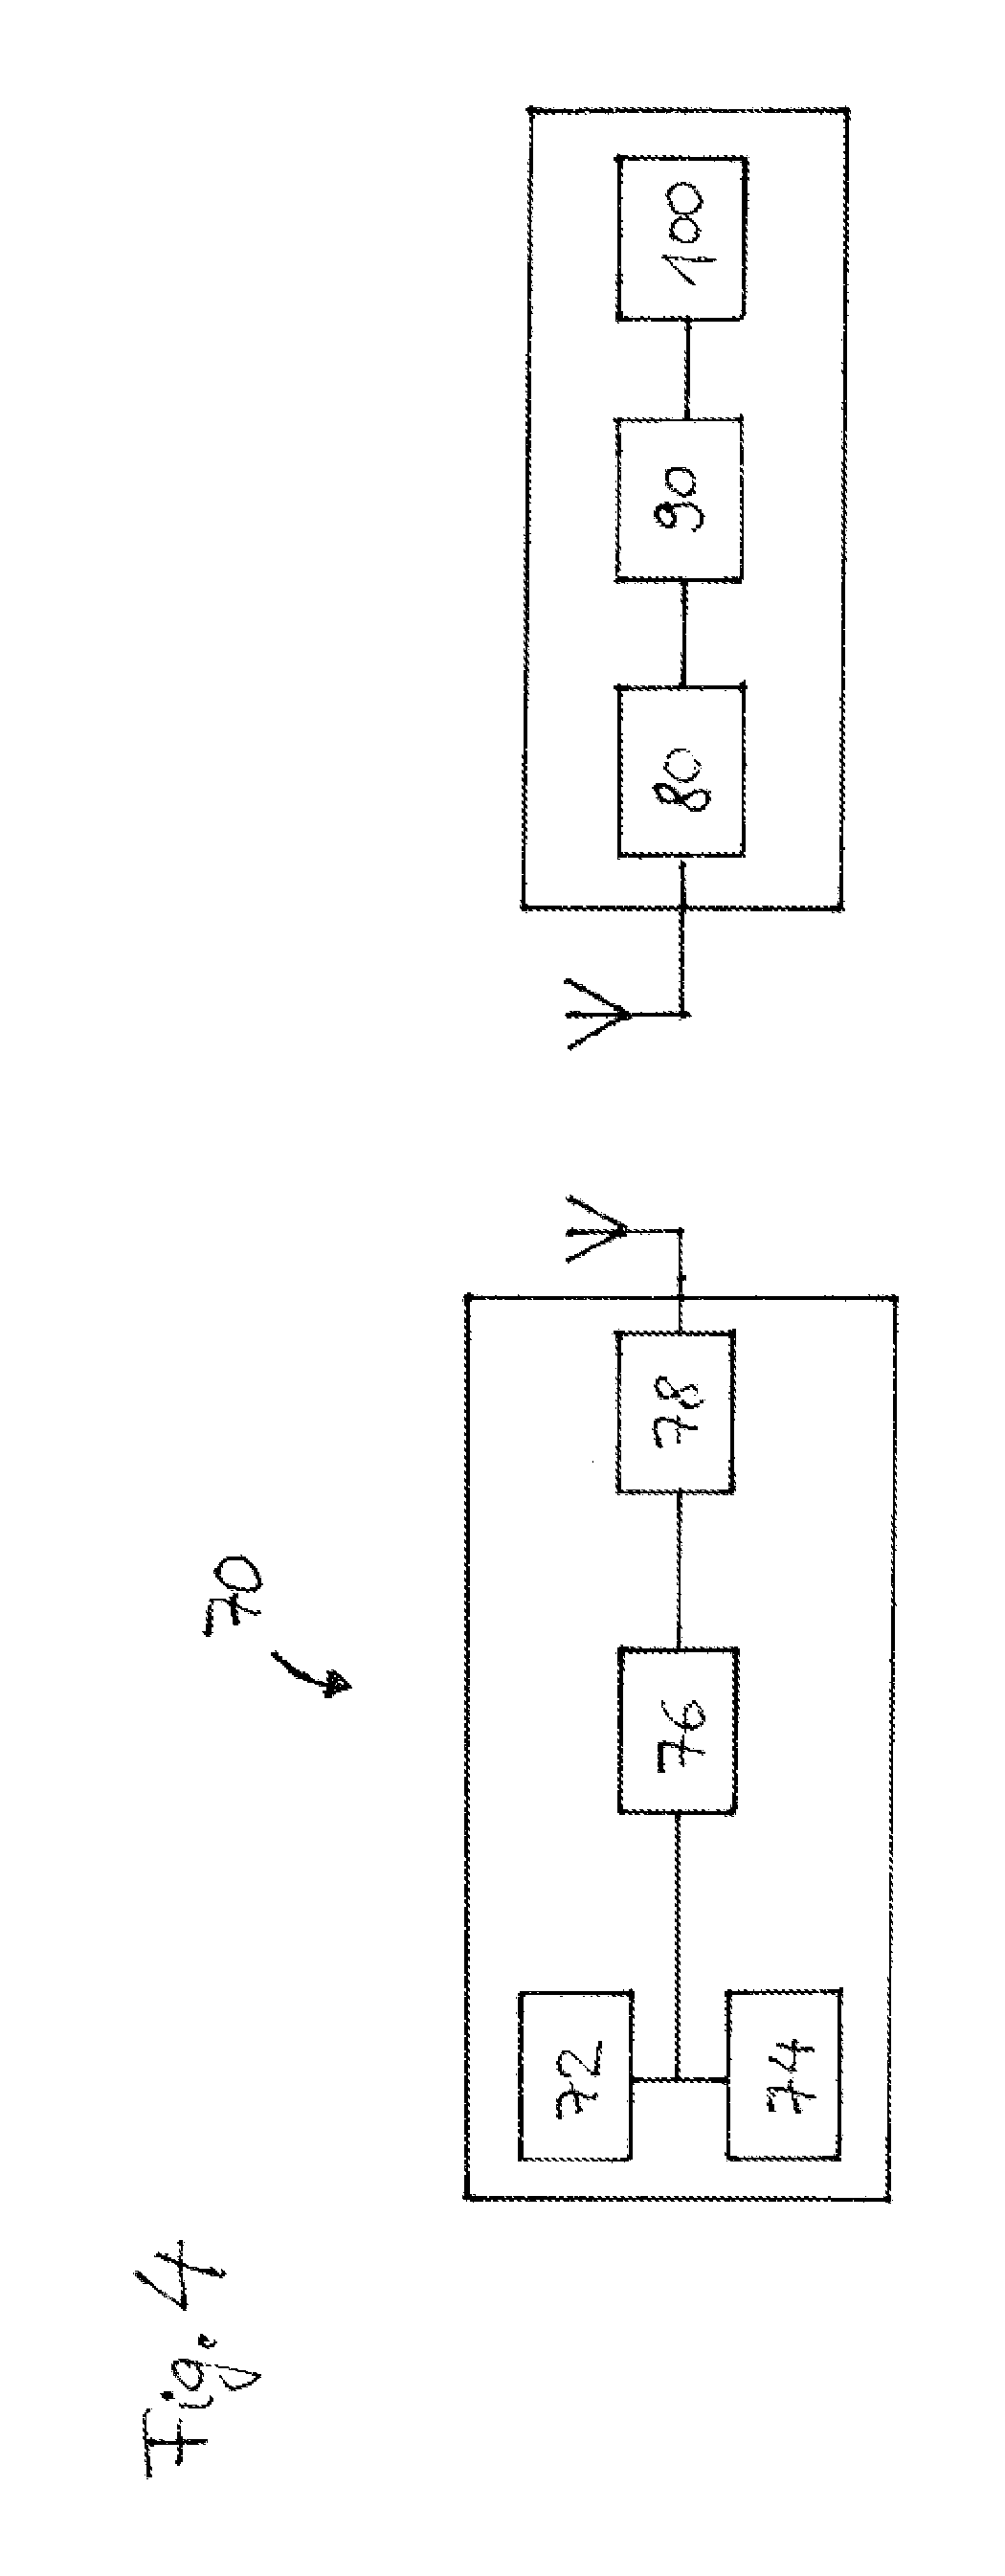 Method and apparatus for evaluating the quality of characteristics of motion of an animal-human-dyad